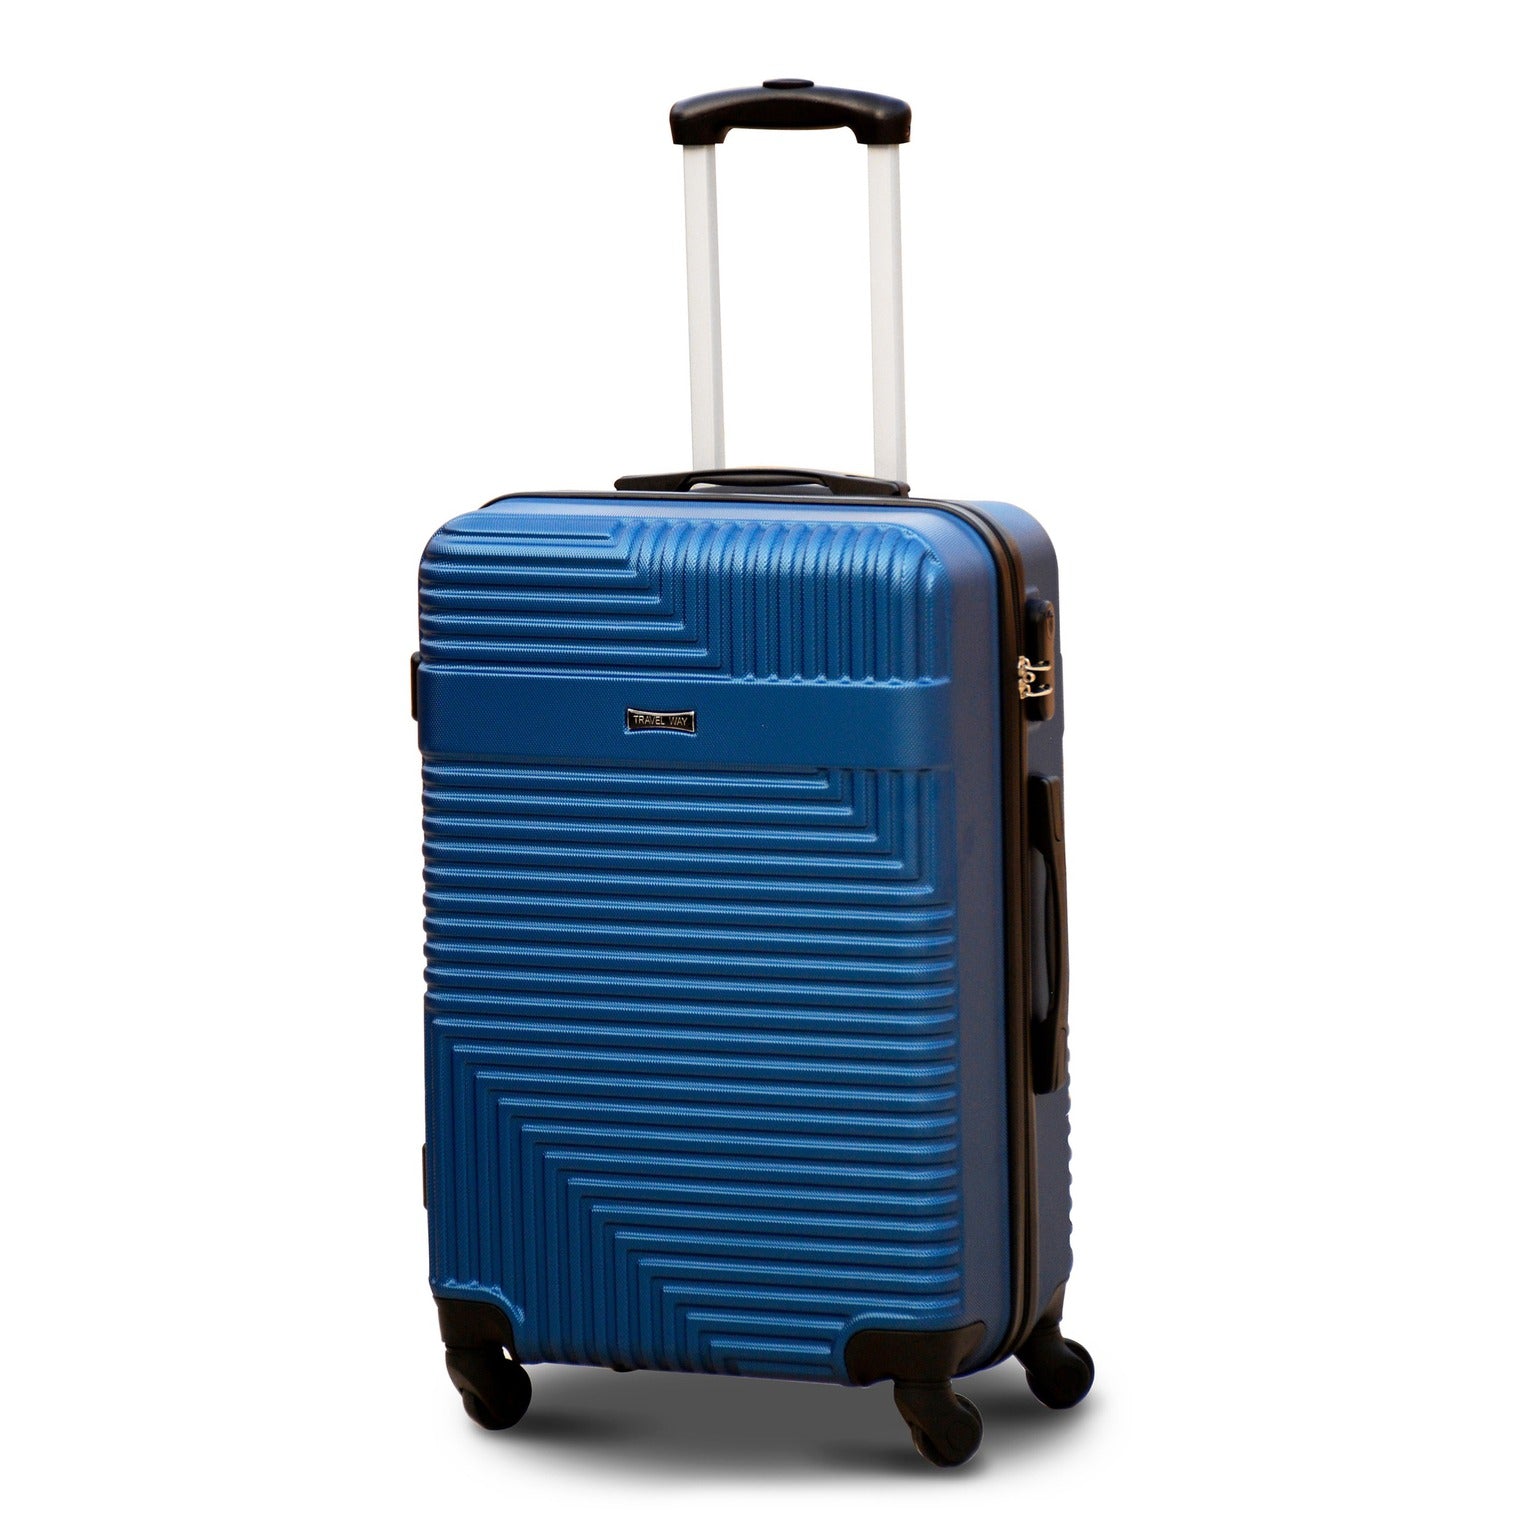 3 Piece Set 20" 24" 28 Inches Blue Colour Travel Way ABS Luggage lightweight Hard Case Trolley Bag | 2 Year Warranty